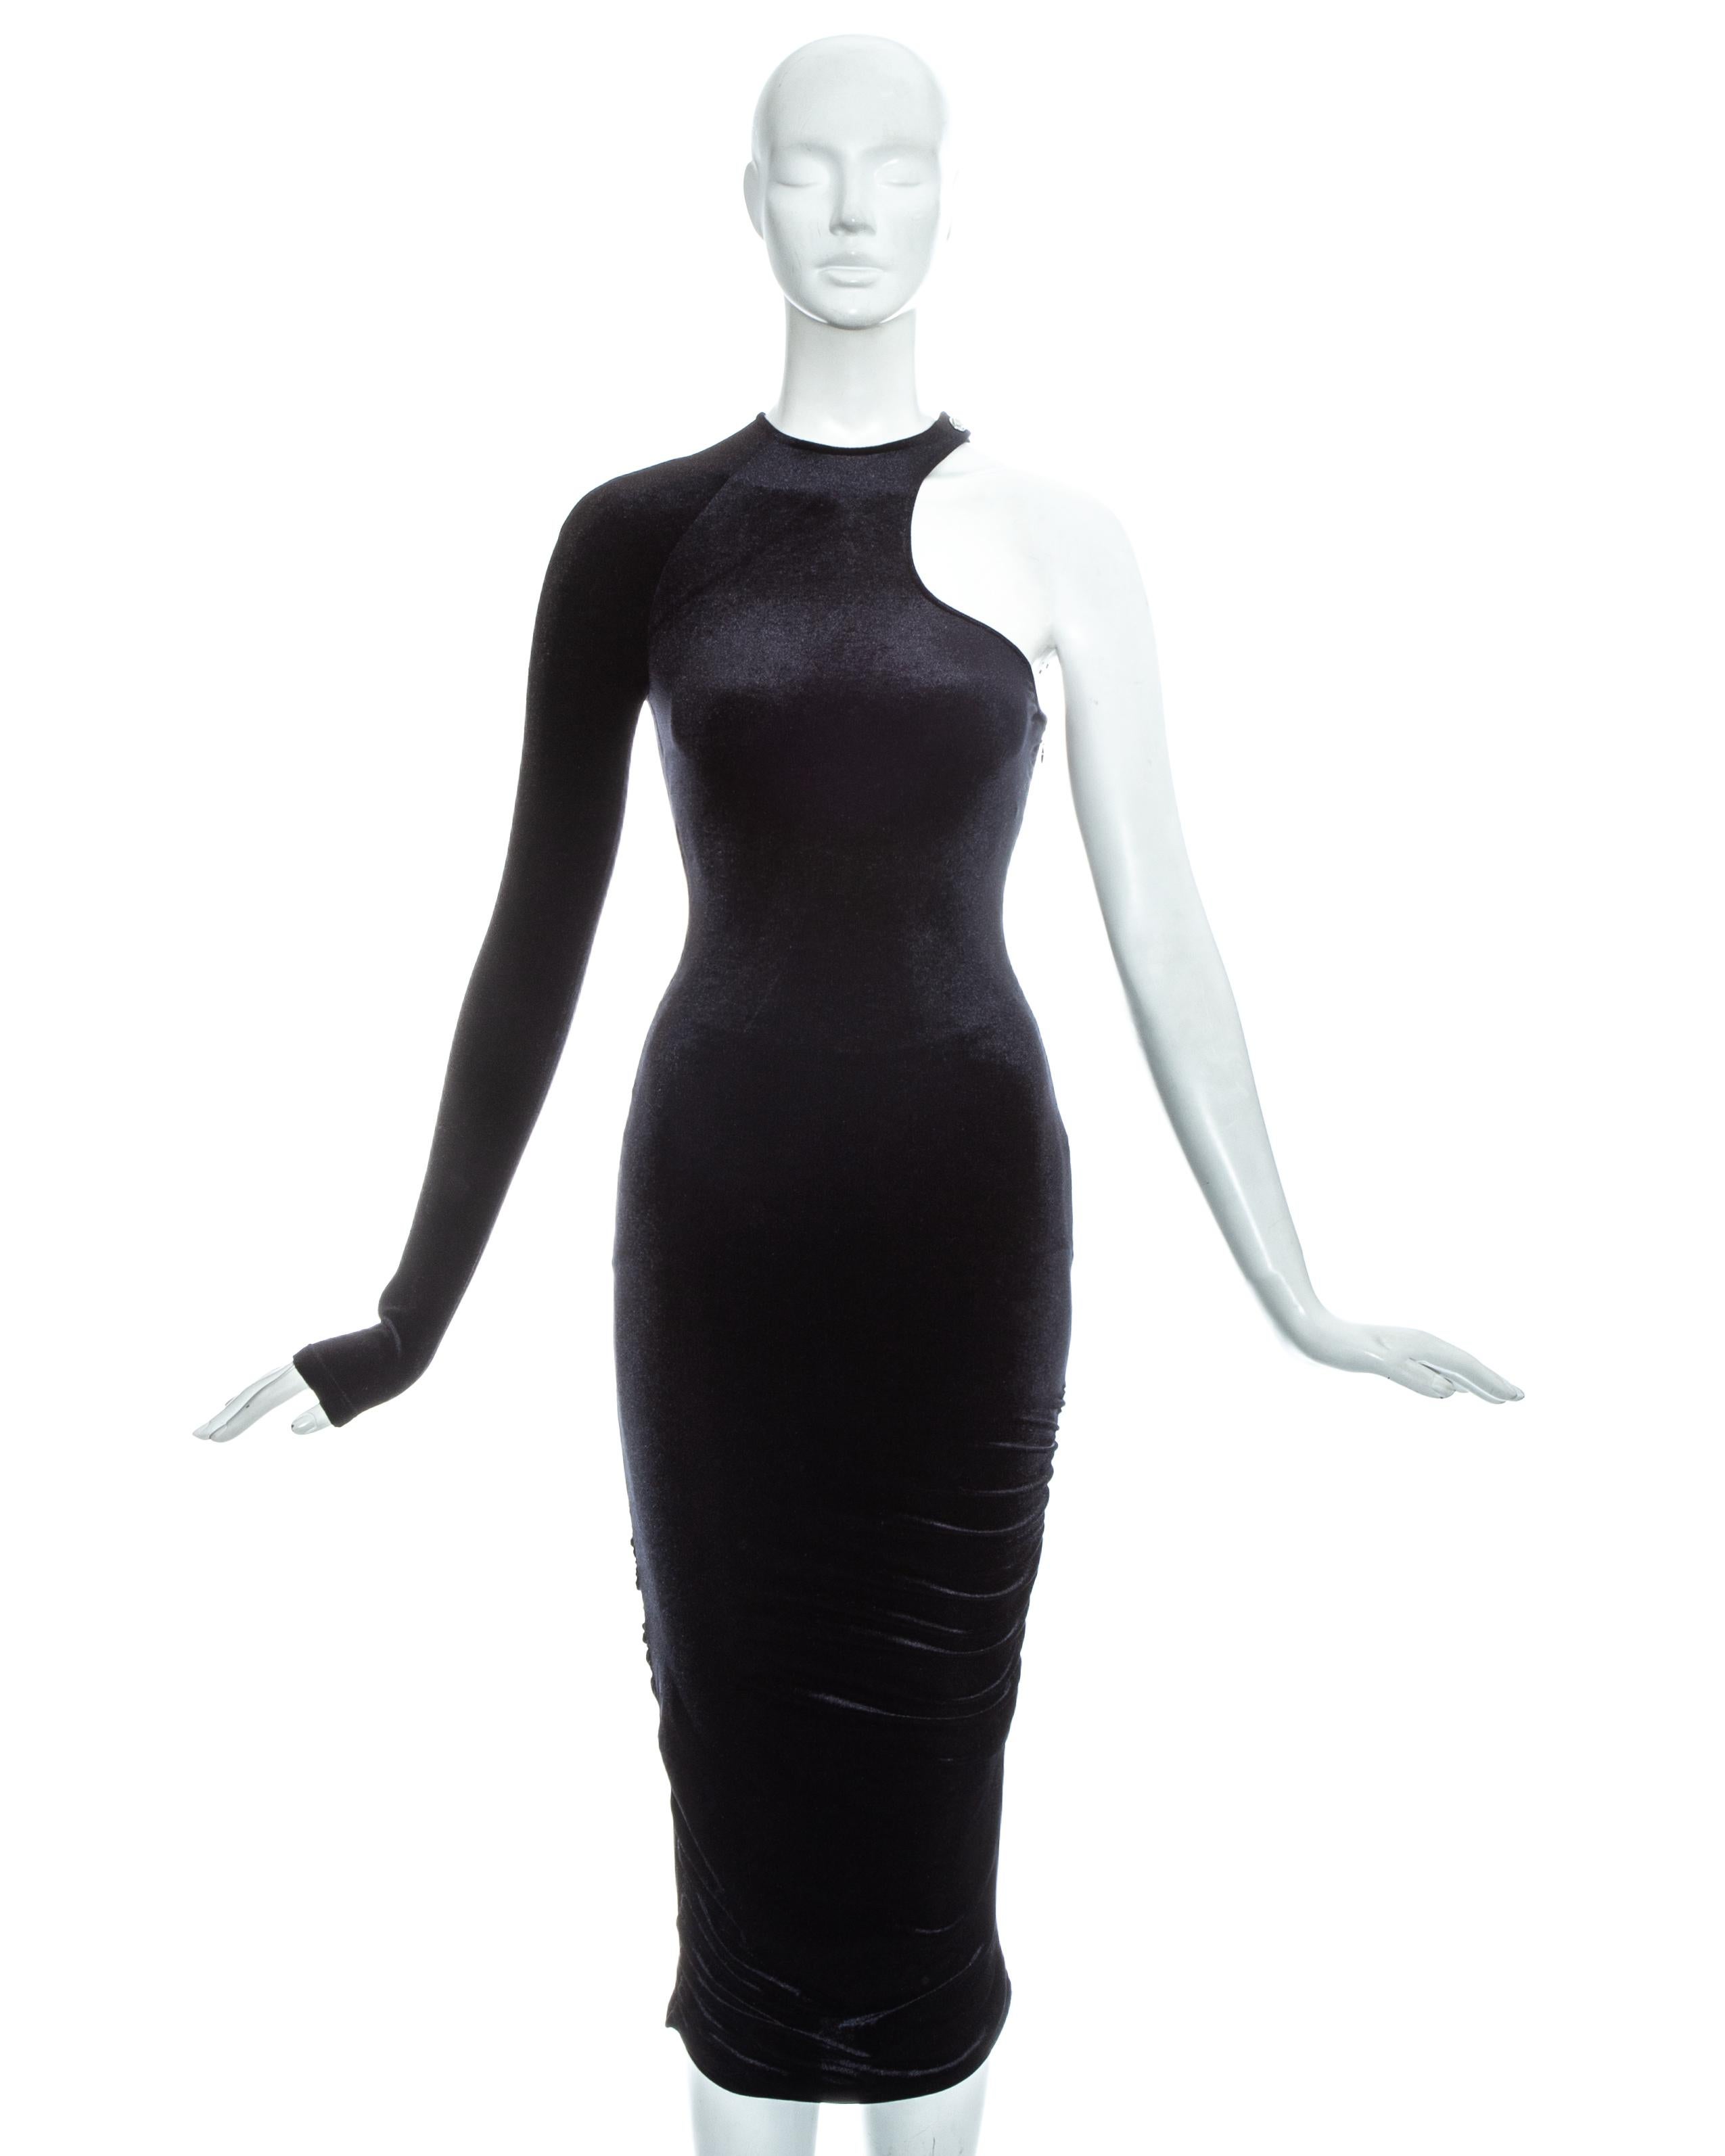 Gianni Versace black velvet figure hugging mid length dress with circular cut out, silver Versace clasp on shoulder and ruched seams on hips.

Fall-Winter 2004